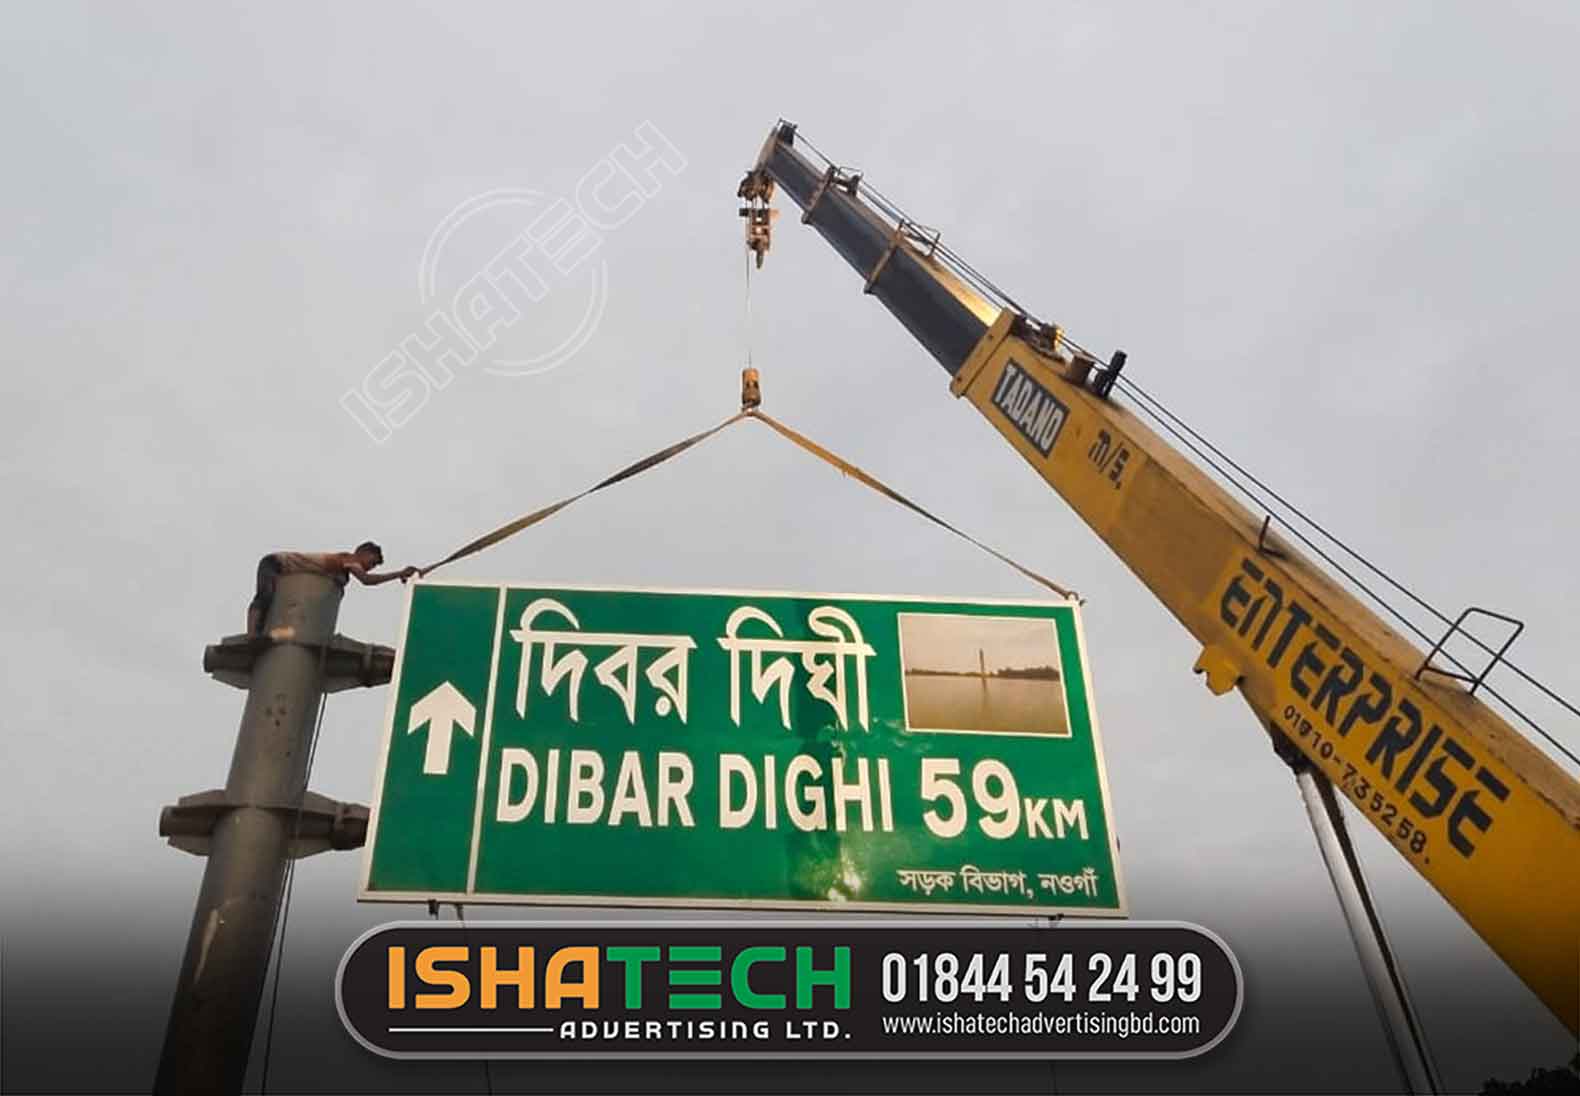 DIBOR DIGY ROAD AND HIGHWAY DIRECTIONL BILLBOARD CREATE BY ISHATECH ADVERTISING LTD AND MATERIALS OF METAL AND SS